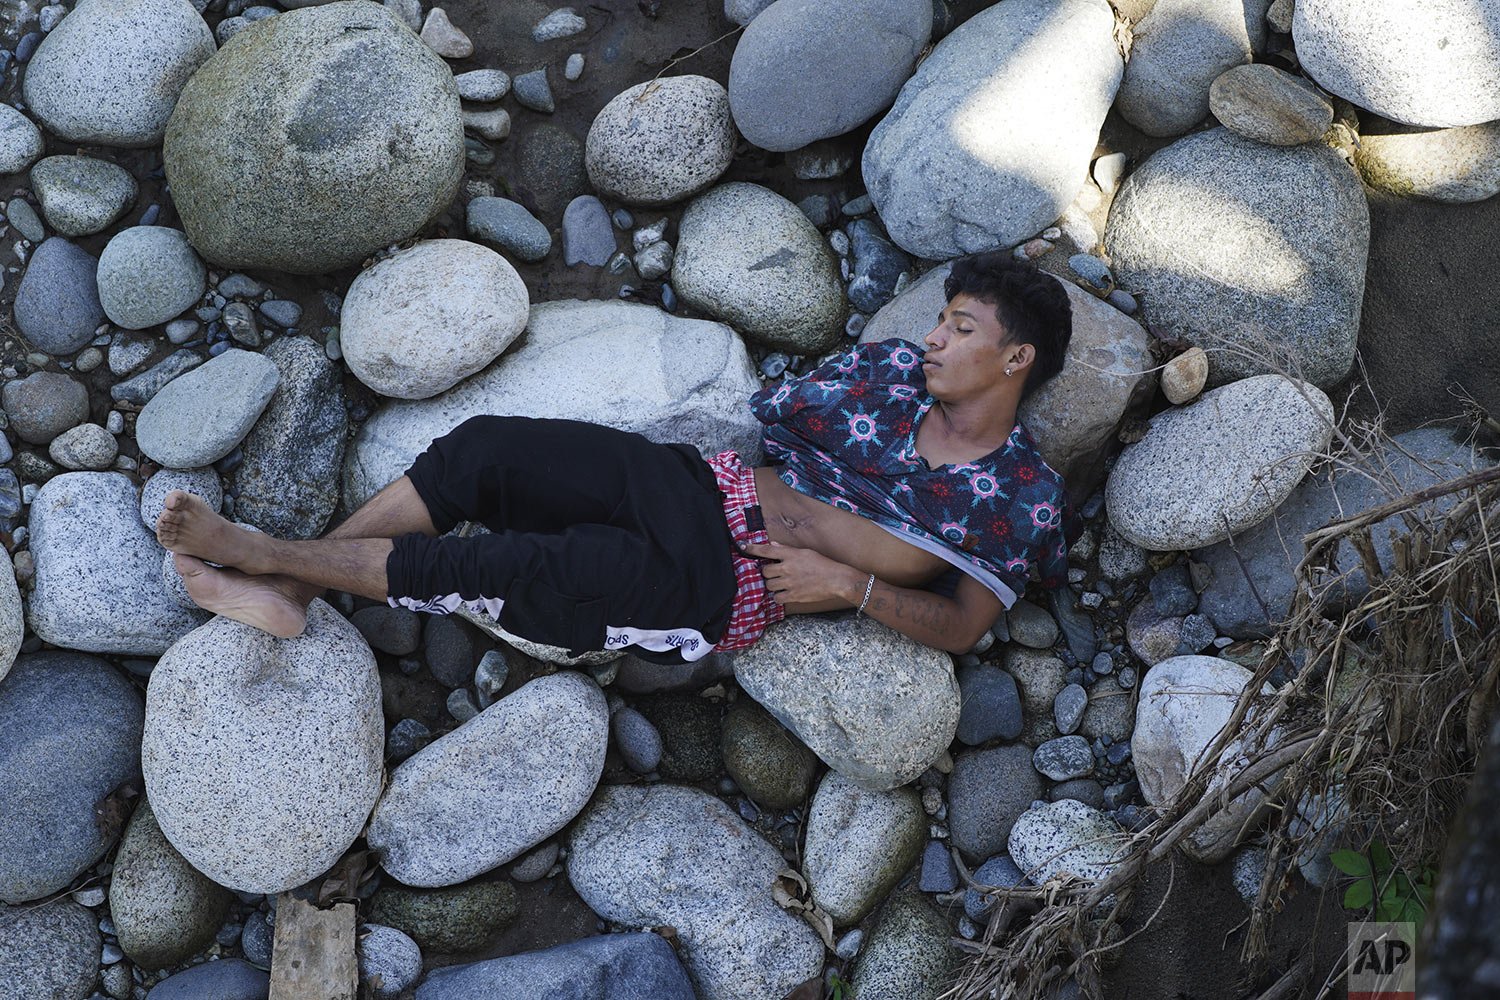  A migrant naps on a bed of rocks on the bank of the Huixtla River in Chiapas state, Mexico, Oct. 26, 2021, on a day of rest during a migrant caravan heading north to the U.S. border. (AP Photo/Marco Ugarte) 